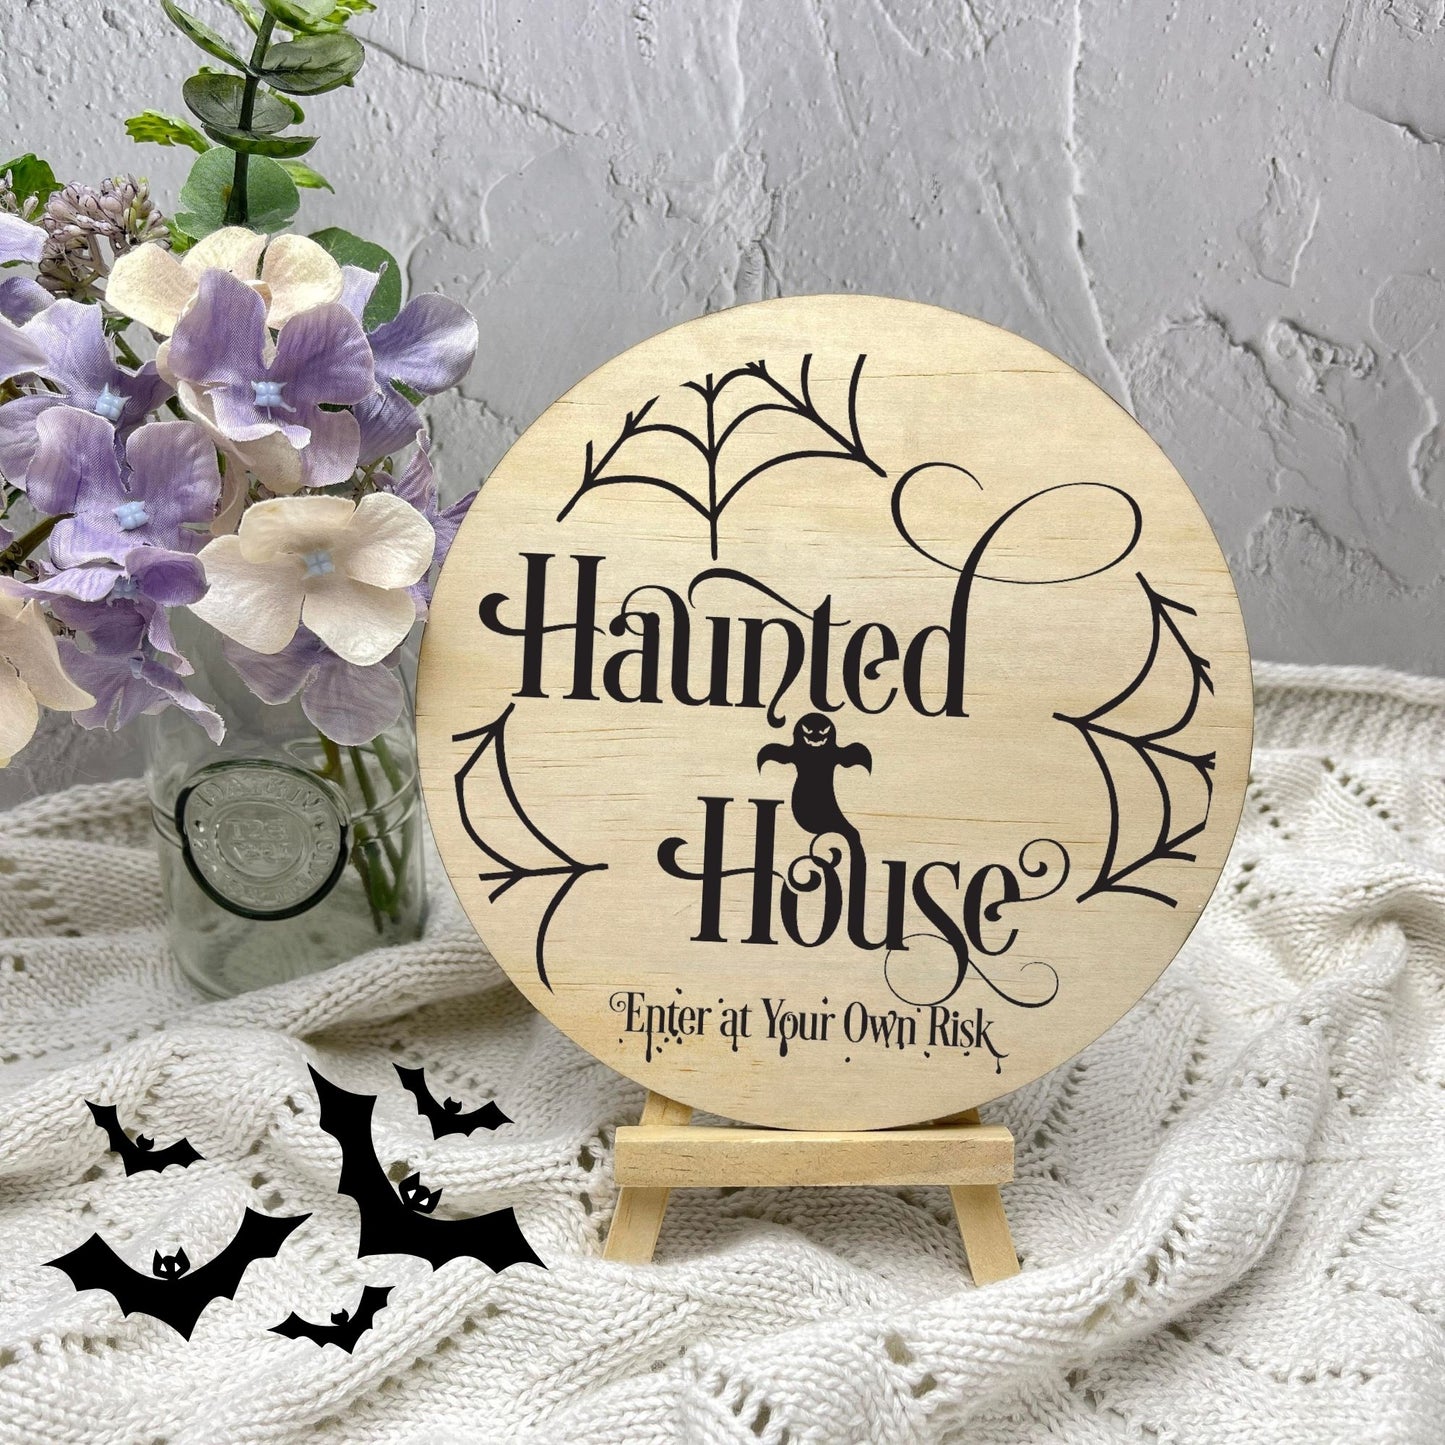 Haunted House sign, Halloween Decor, Spooky Vibes, hocus pocus sign, trick or treat decor, haunted house h27